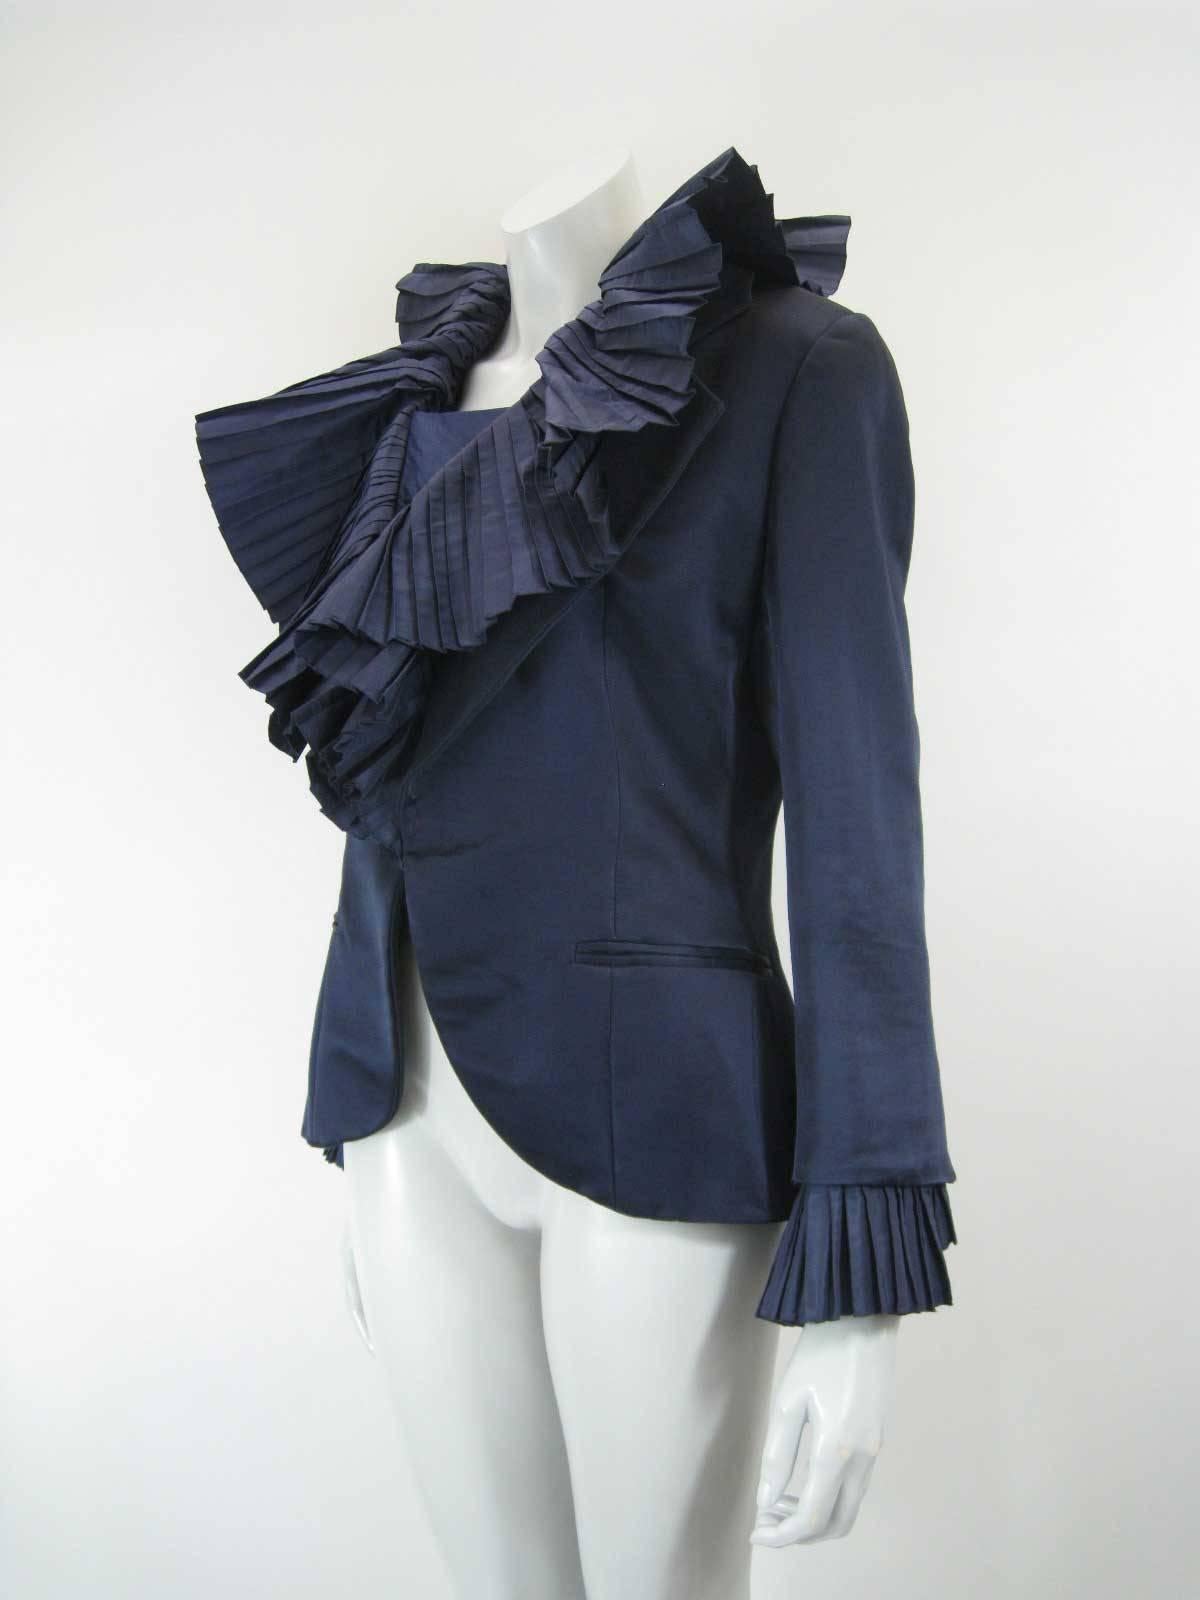 Stunning vintage Christian Dior Boutique evening jacket.

Deep blue satin color. 

Exaggerated accordian pleated collar and cuffs.

Hidden snap closure.

Hidden button placket.

Faux pockets on front hip.

Button cuffs.

Numbered 45148. Handwritten